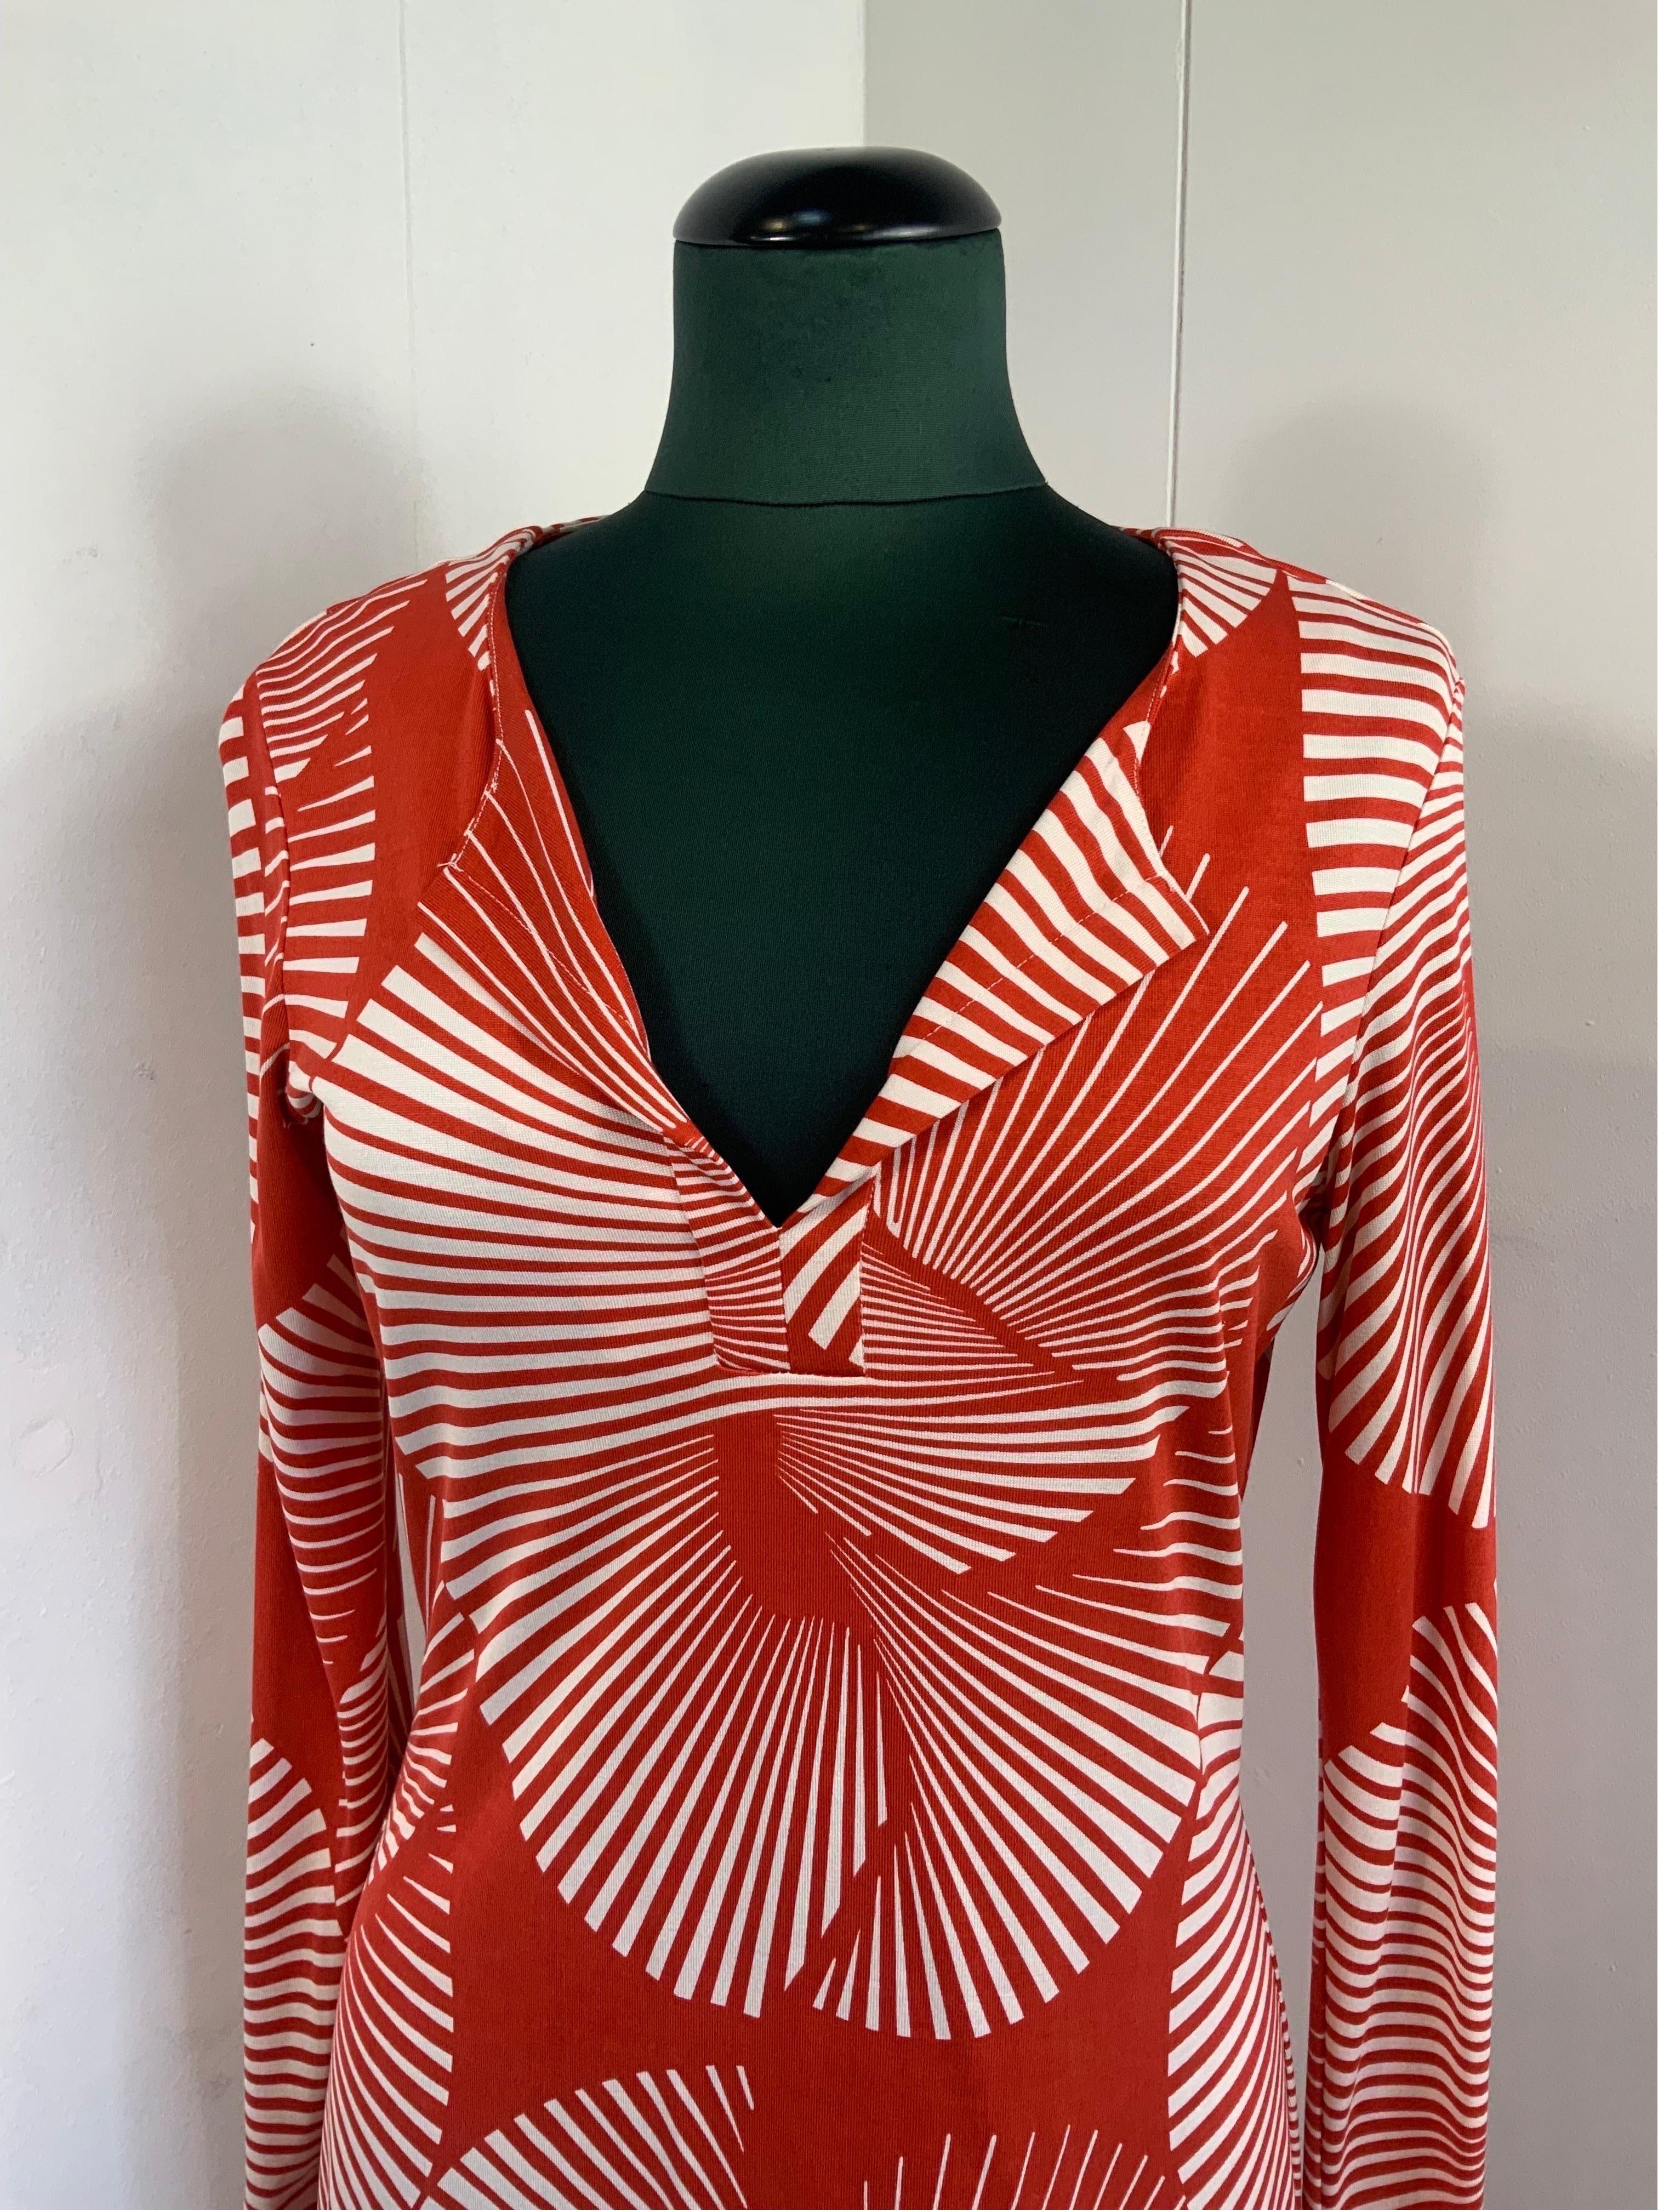 Diane Von Furstenberg dress.
Composition and size tags are missing. 
The brand label has been cut but features the authenticity hologram.
We think the material is a mix between silk and viscose.
It fits a 40/42 Italian.
Shoulders 40 cm
Bust 44